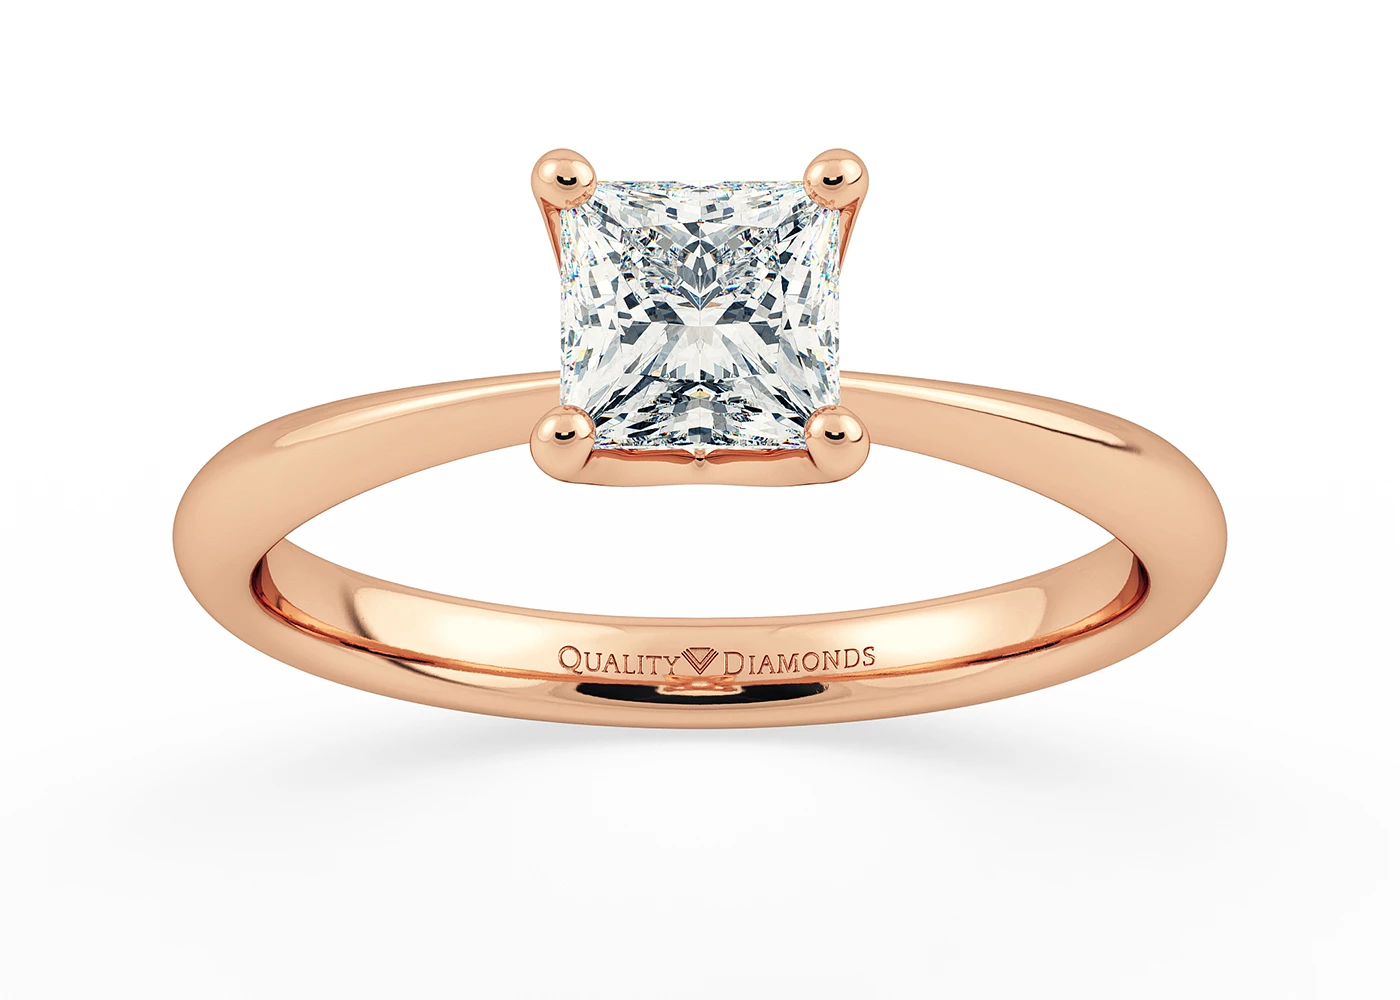 One Carat Princess Solitaire Diamond Engagement Ring in 18K Rose Gold